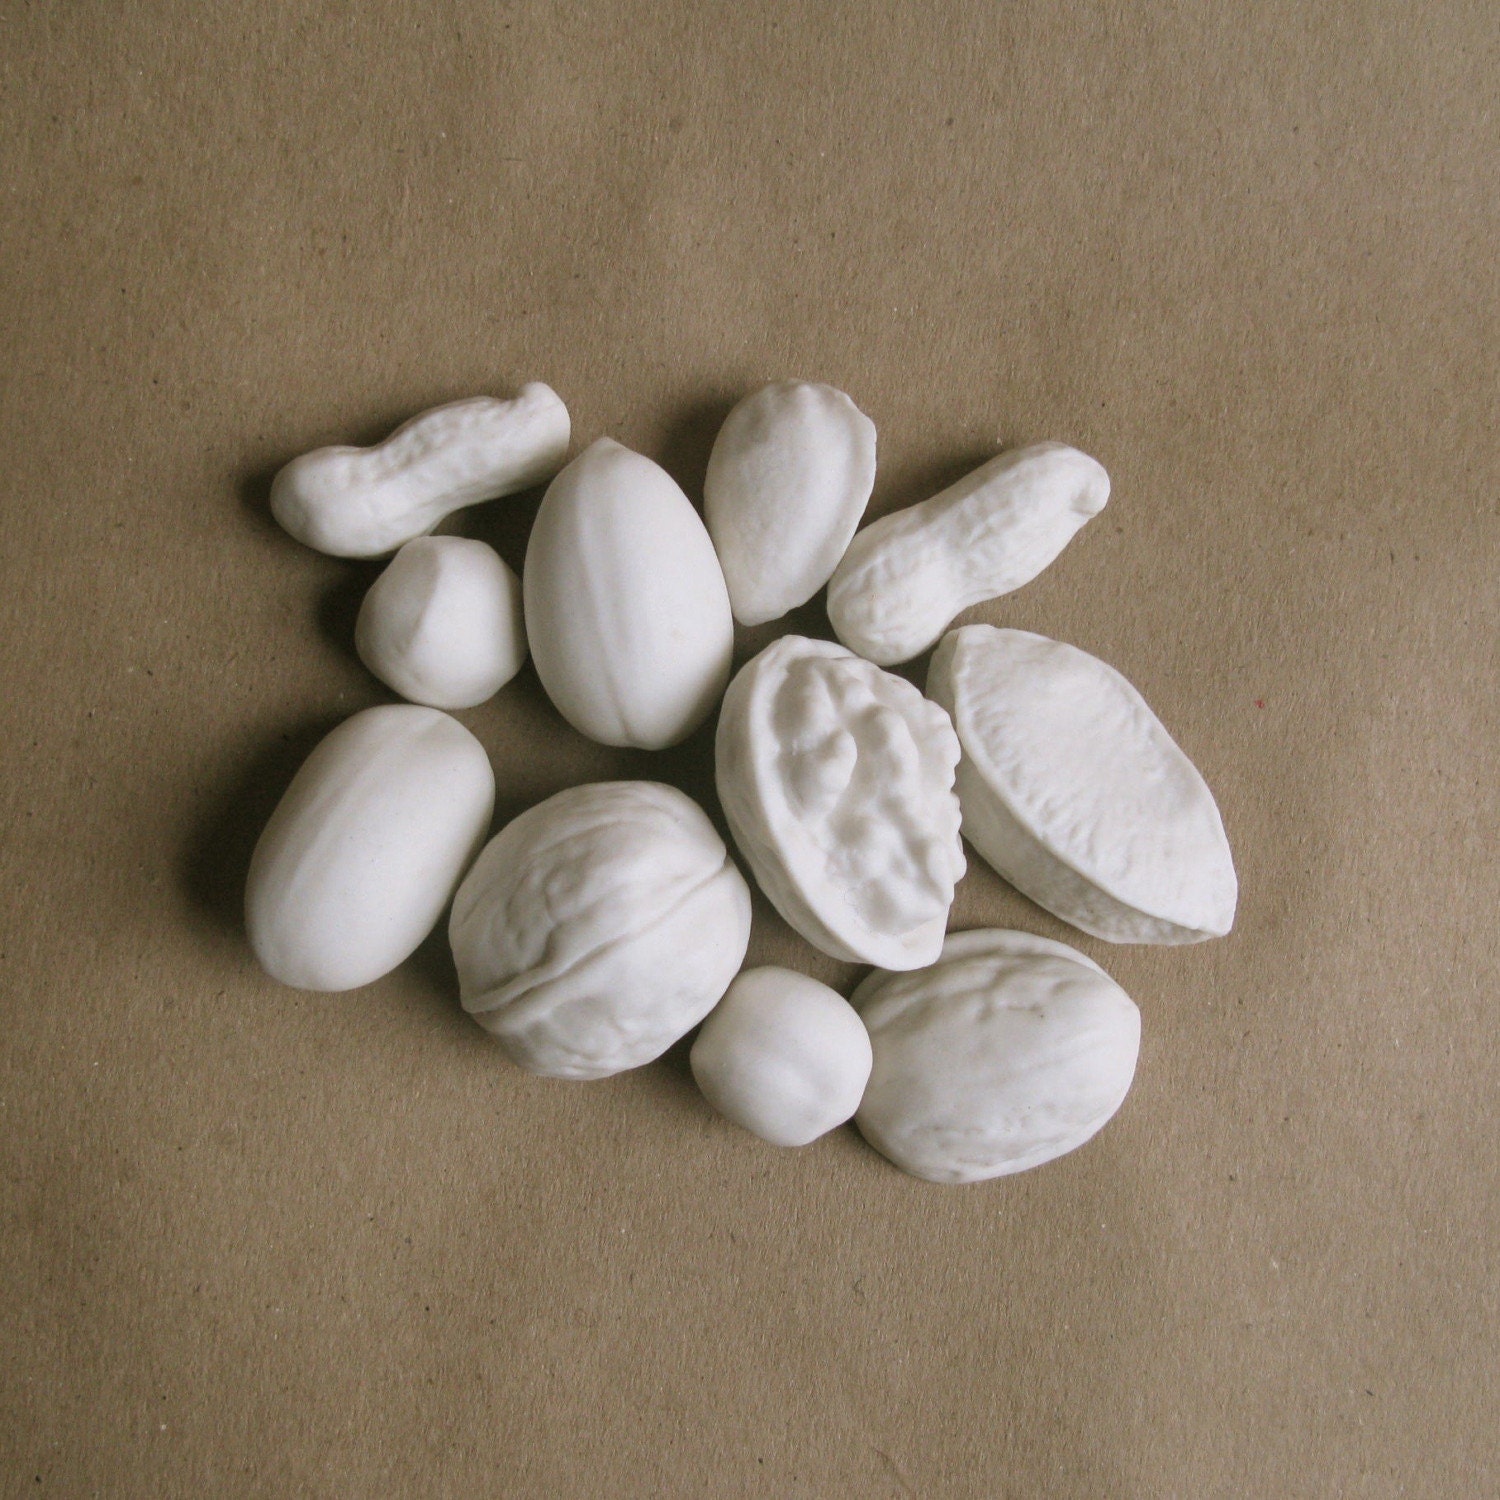 Porcelain Mixed Nuts